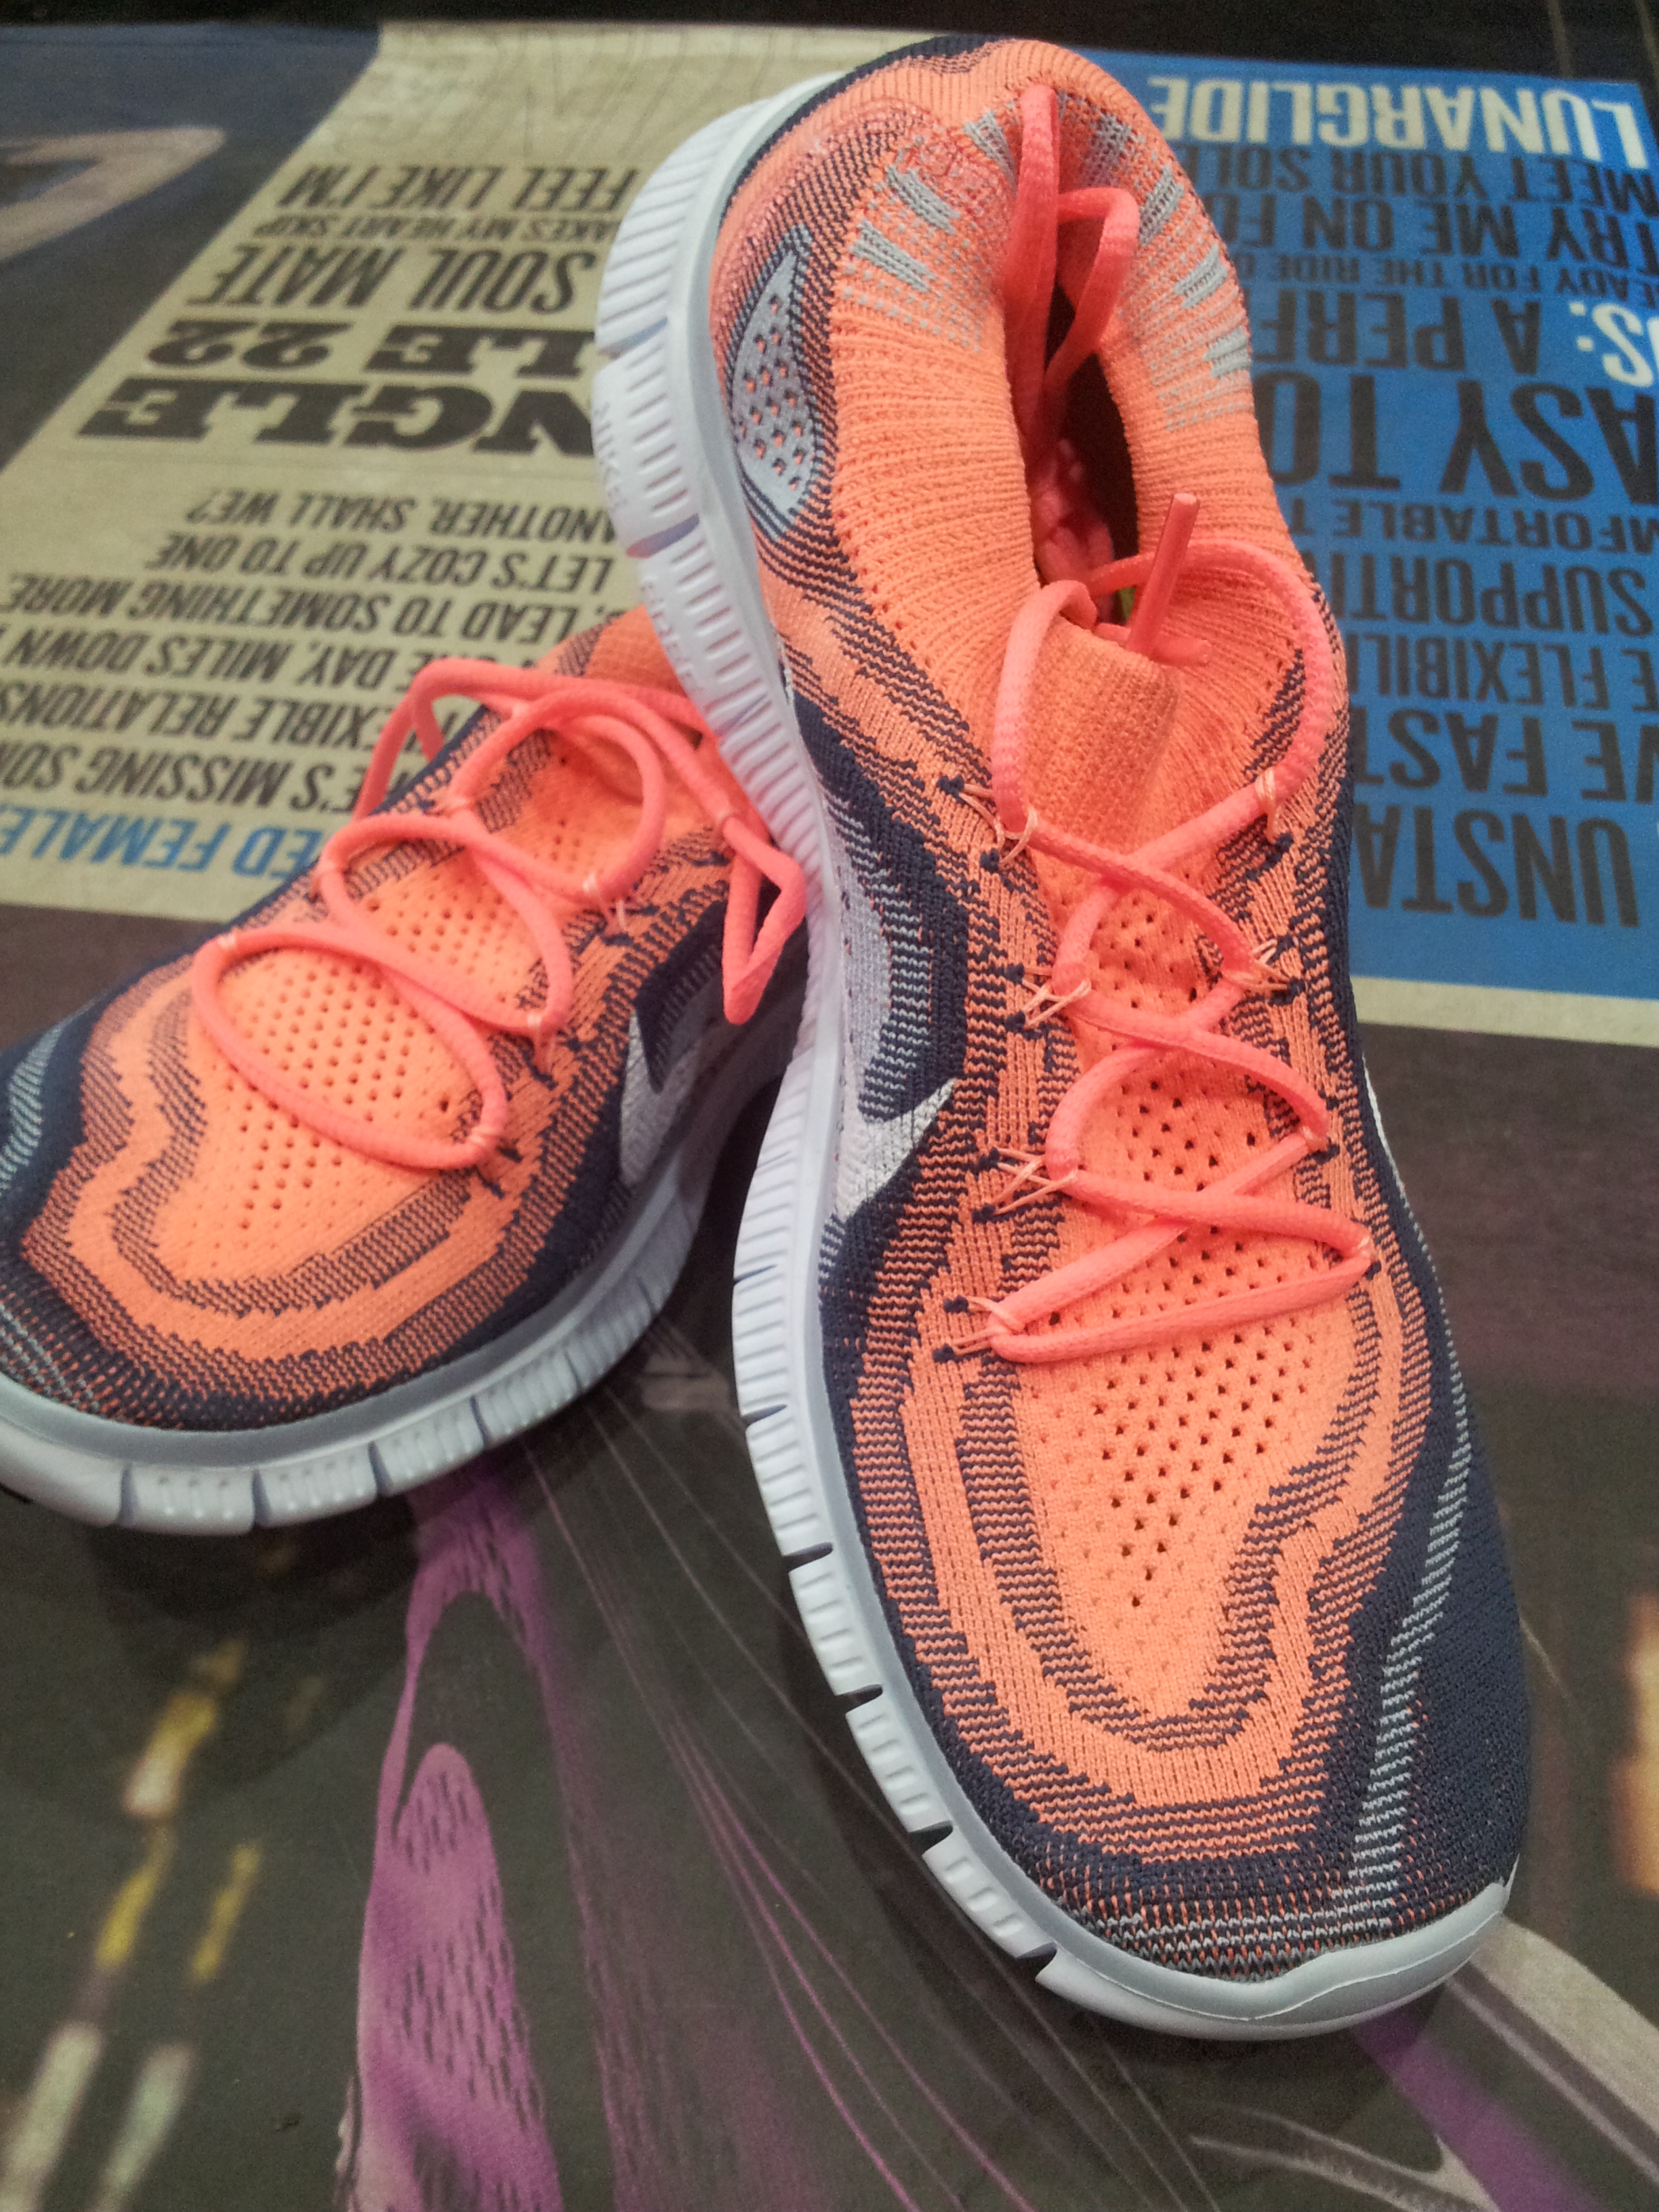 The Nike Free Flyknit review